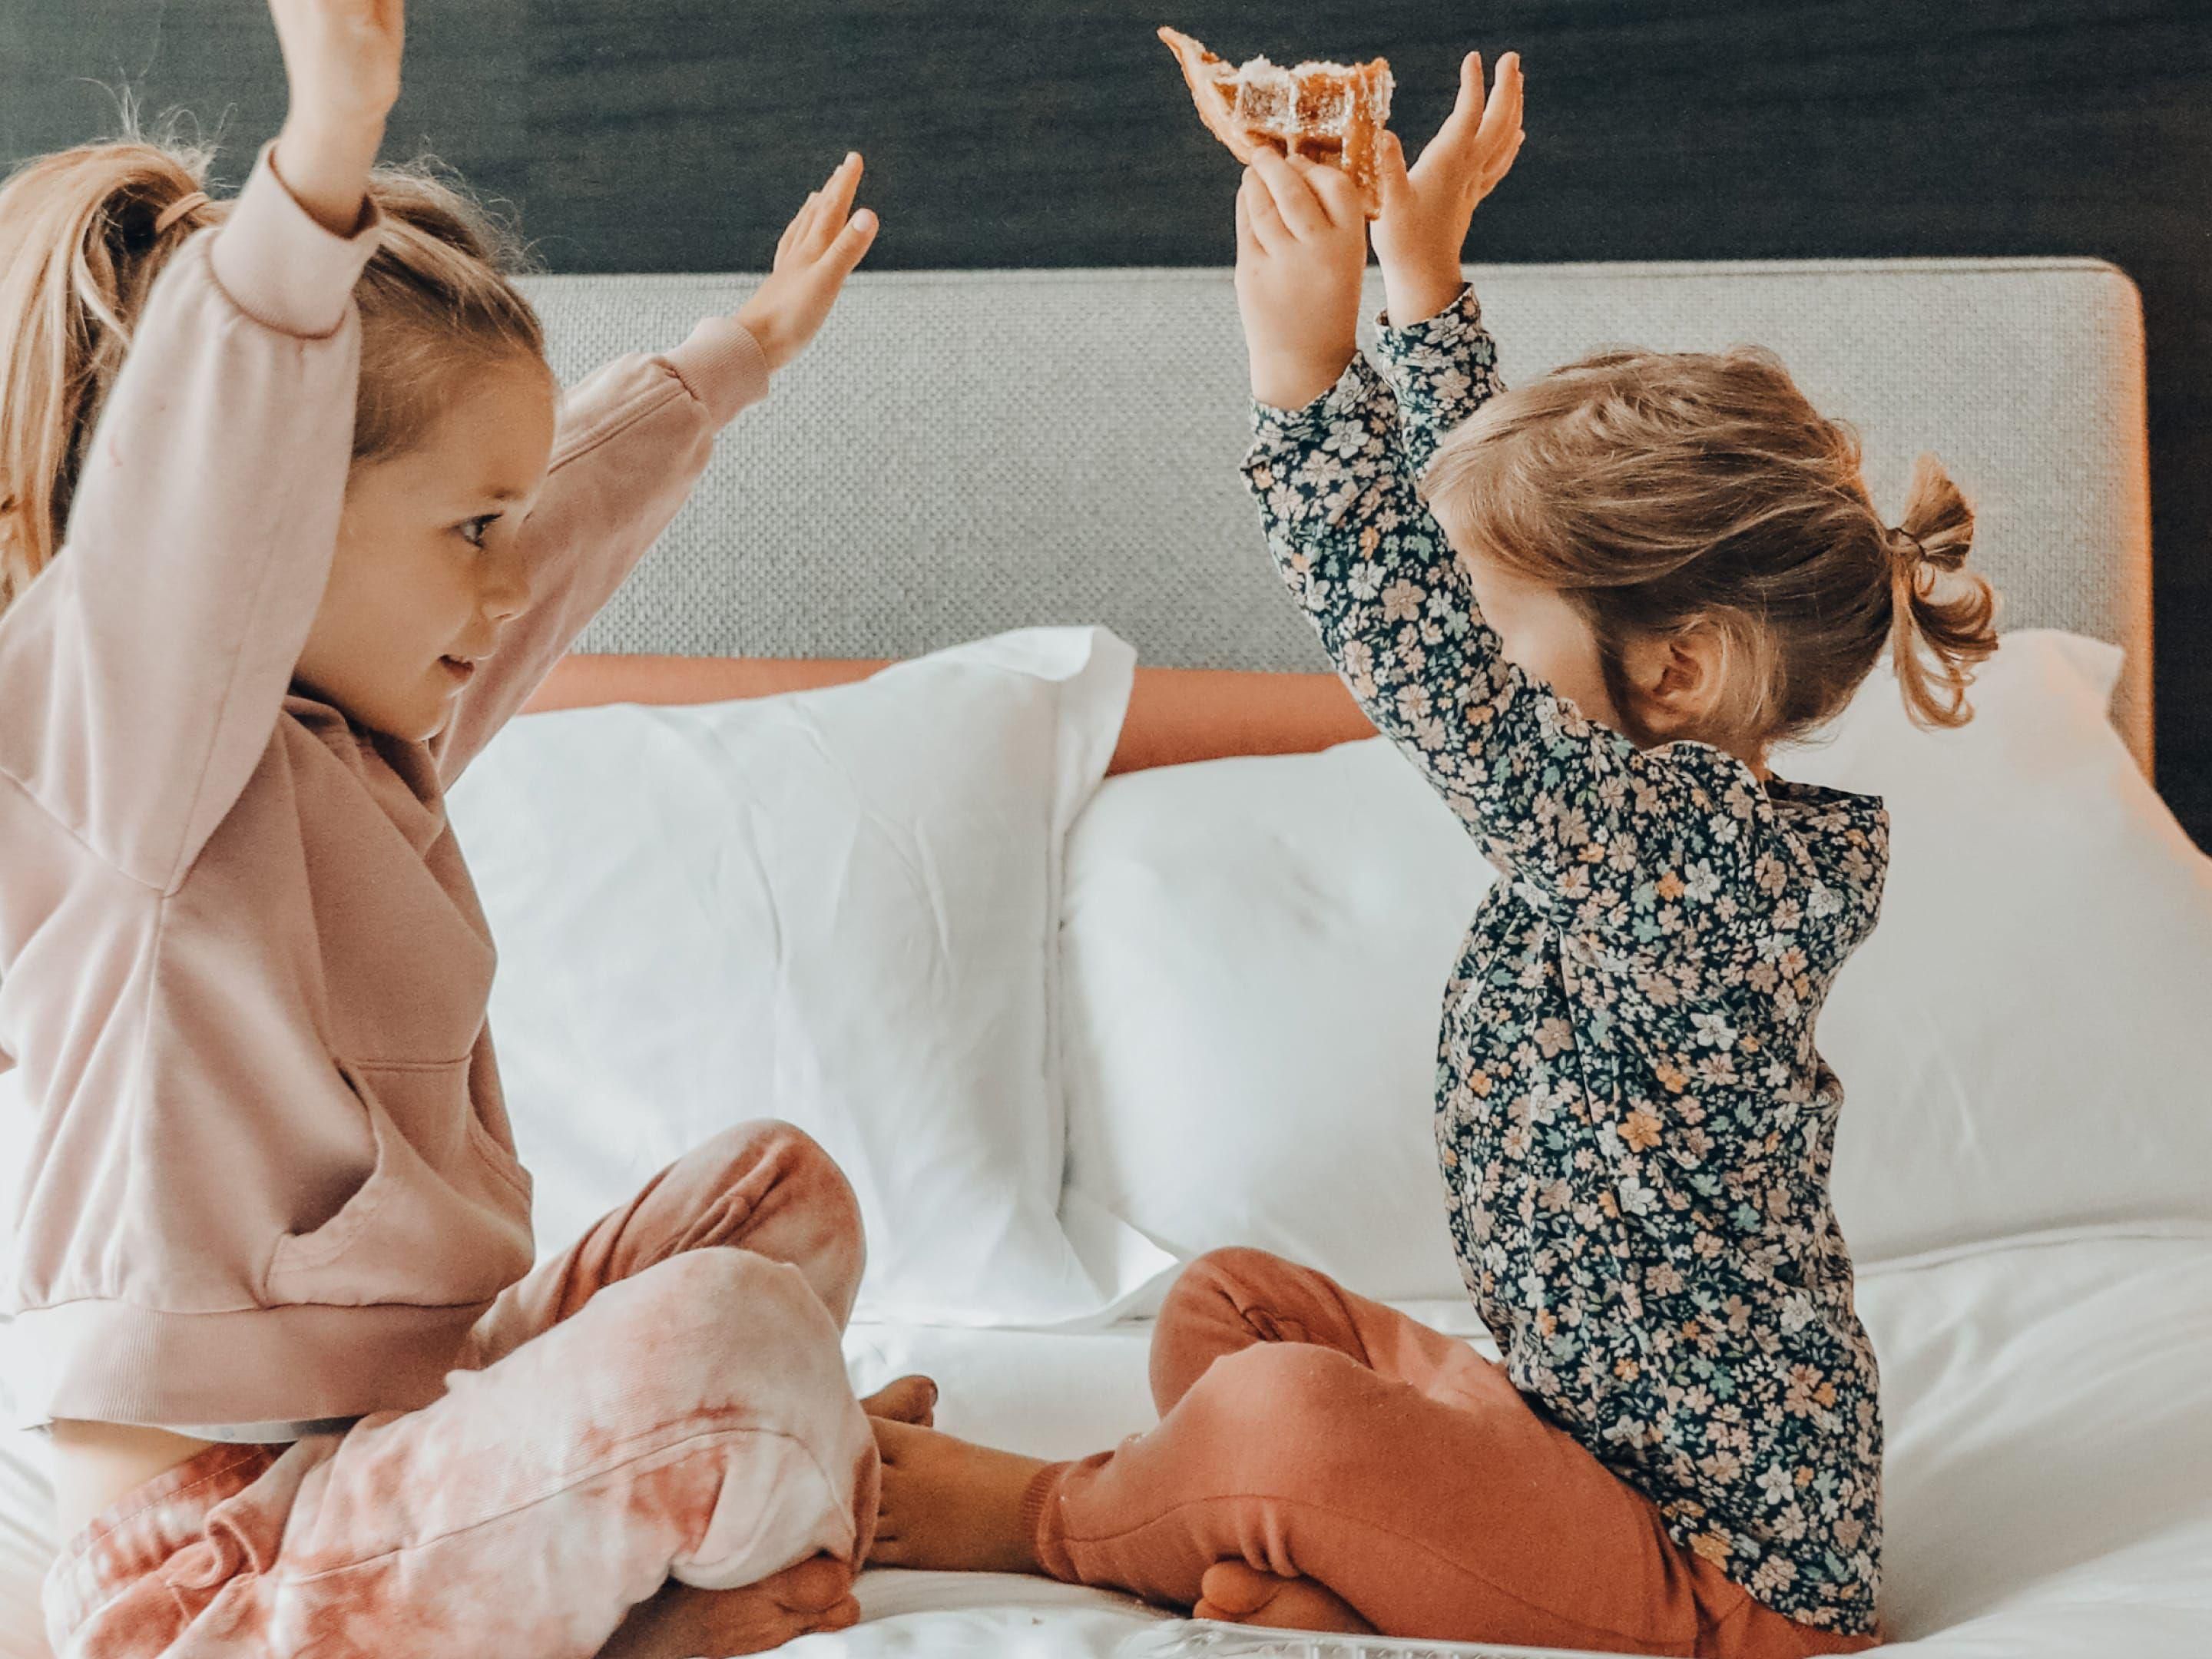 Children under the age of 12 can stay at no extra charge when they share a room with their parents. Additionally, for every adult ordering from the main menu at any Holiday Inn® restaurant, two children aged 12 or under can enjoy complimentary meals. Please note that there's a maximum of four children per dining party eligible for this offer.